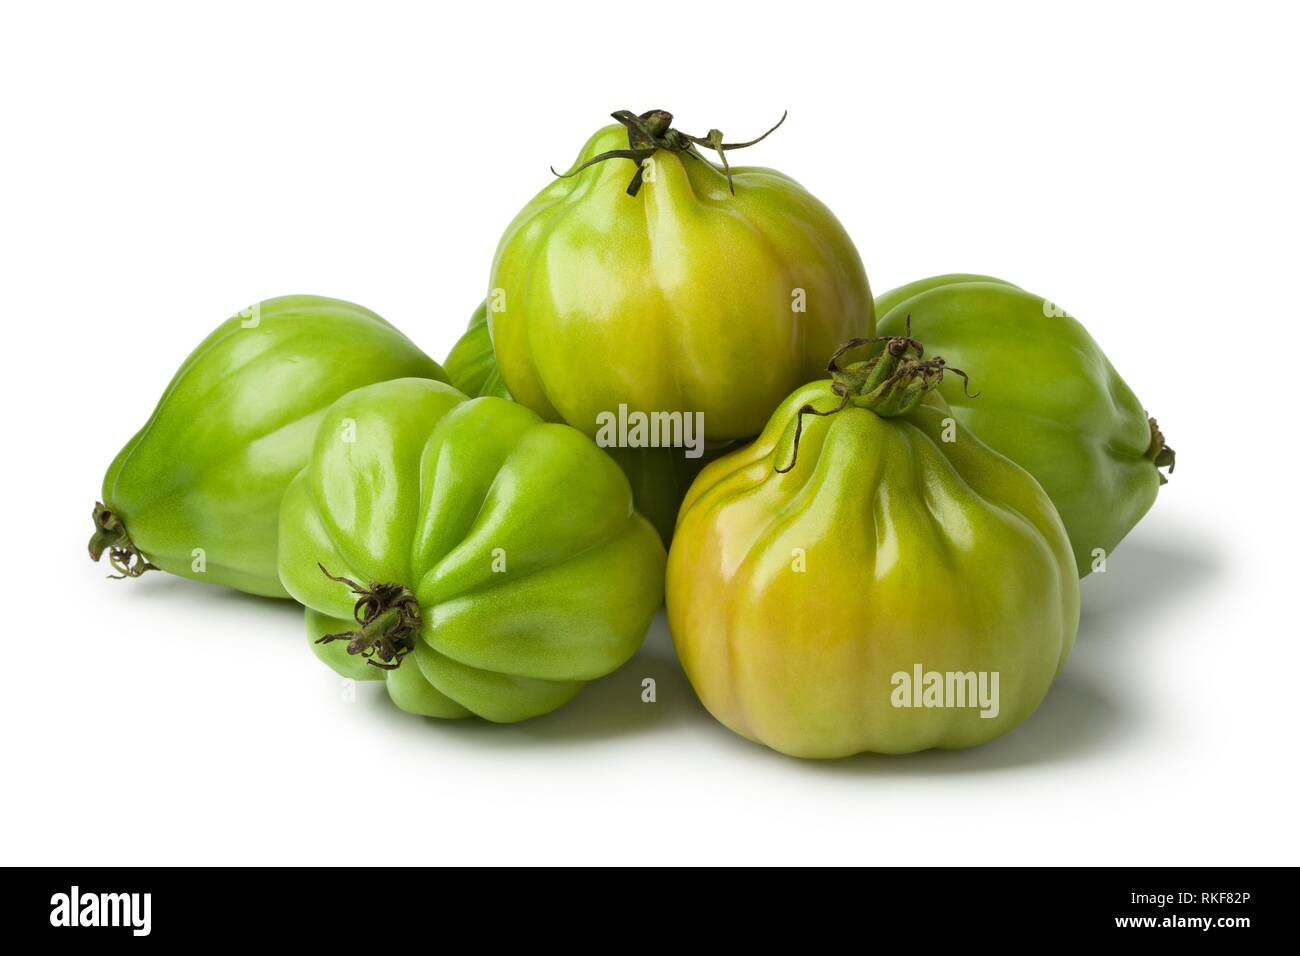 Heap of green Coeur de boeuf tomatoes on white background. Stock Photo